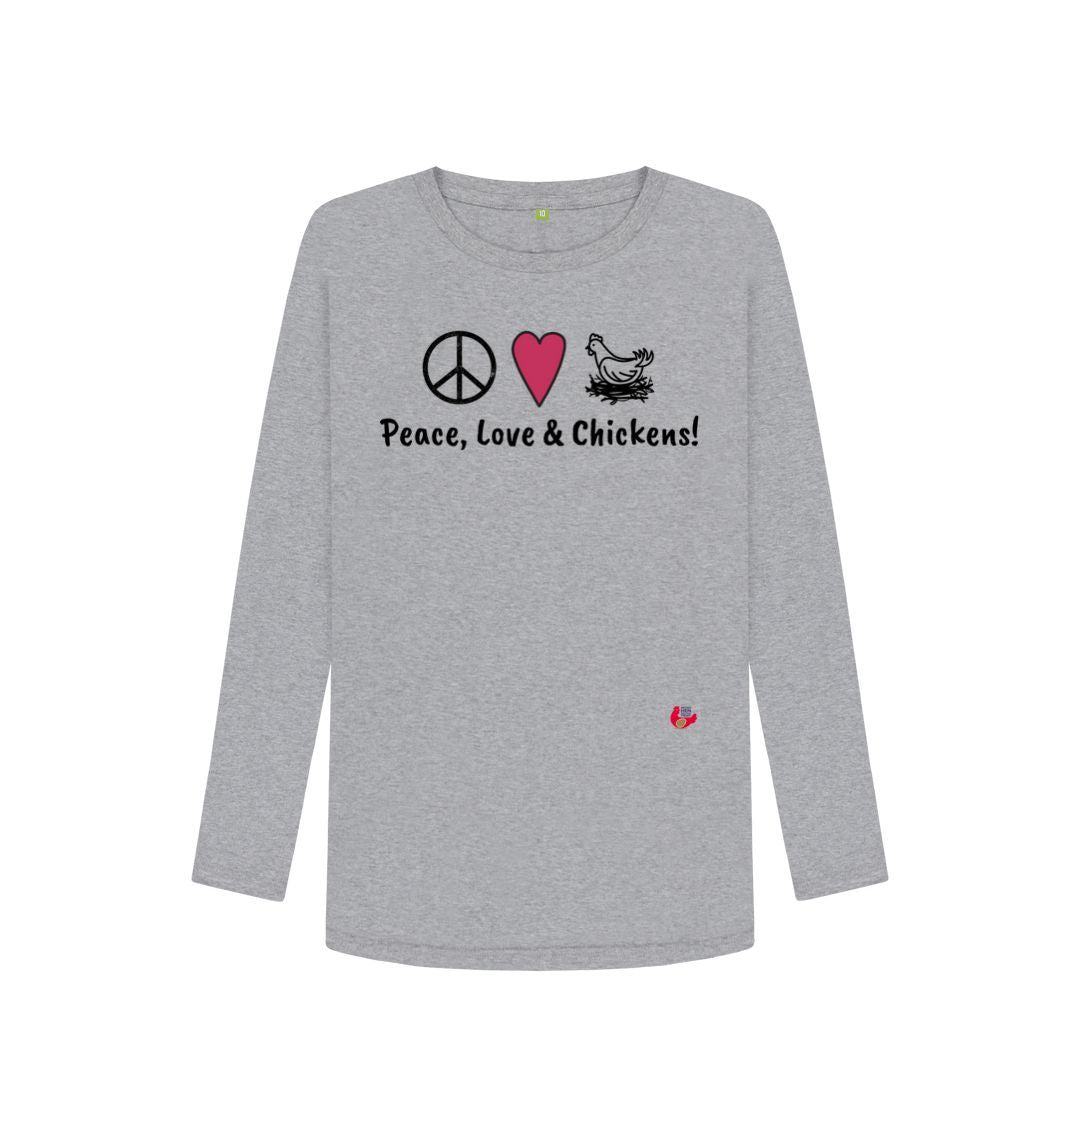 Athletic Grey Women's Long Sleeve T-Shirt - Peace, Love & Chickens - Large Logo